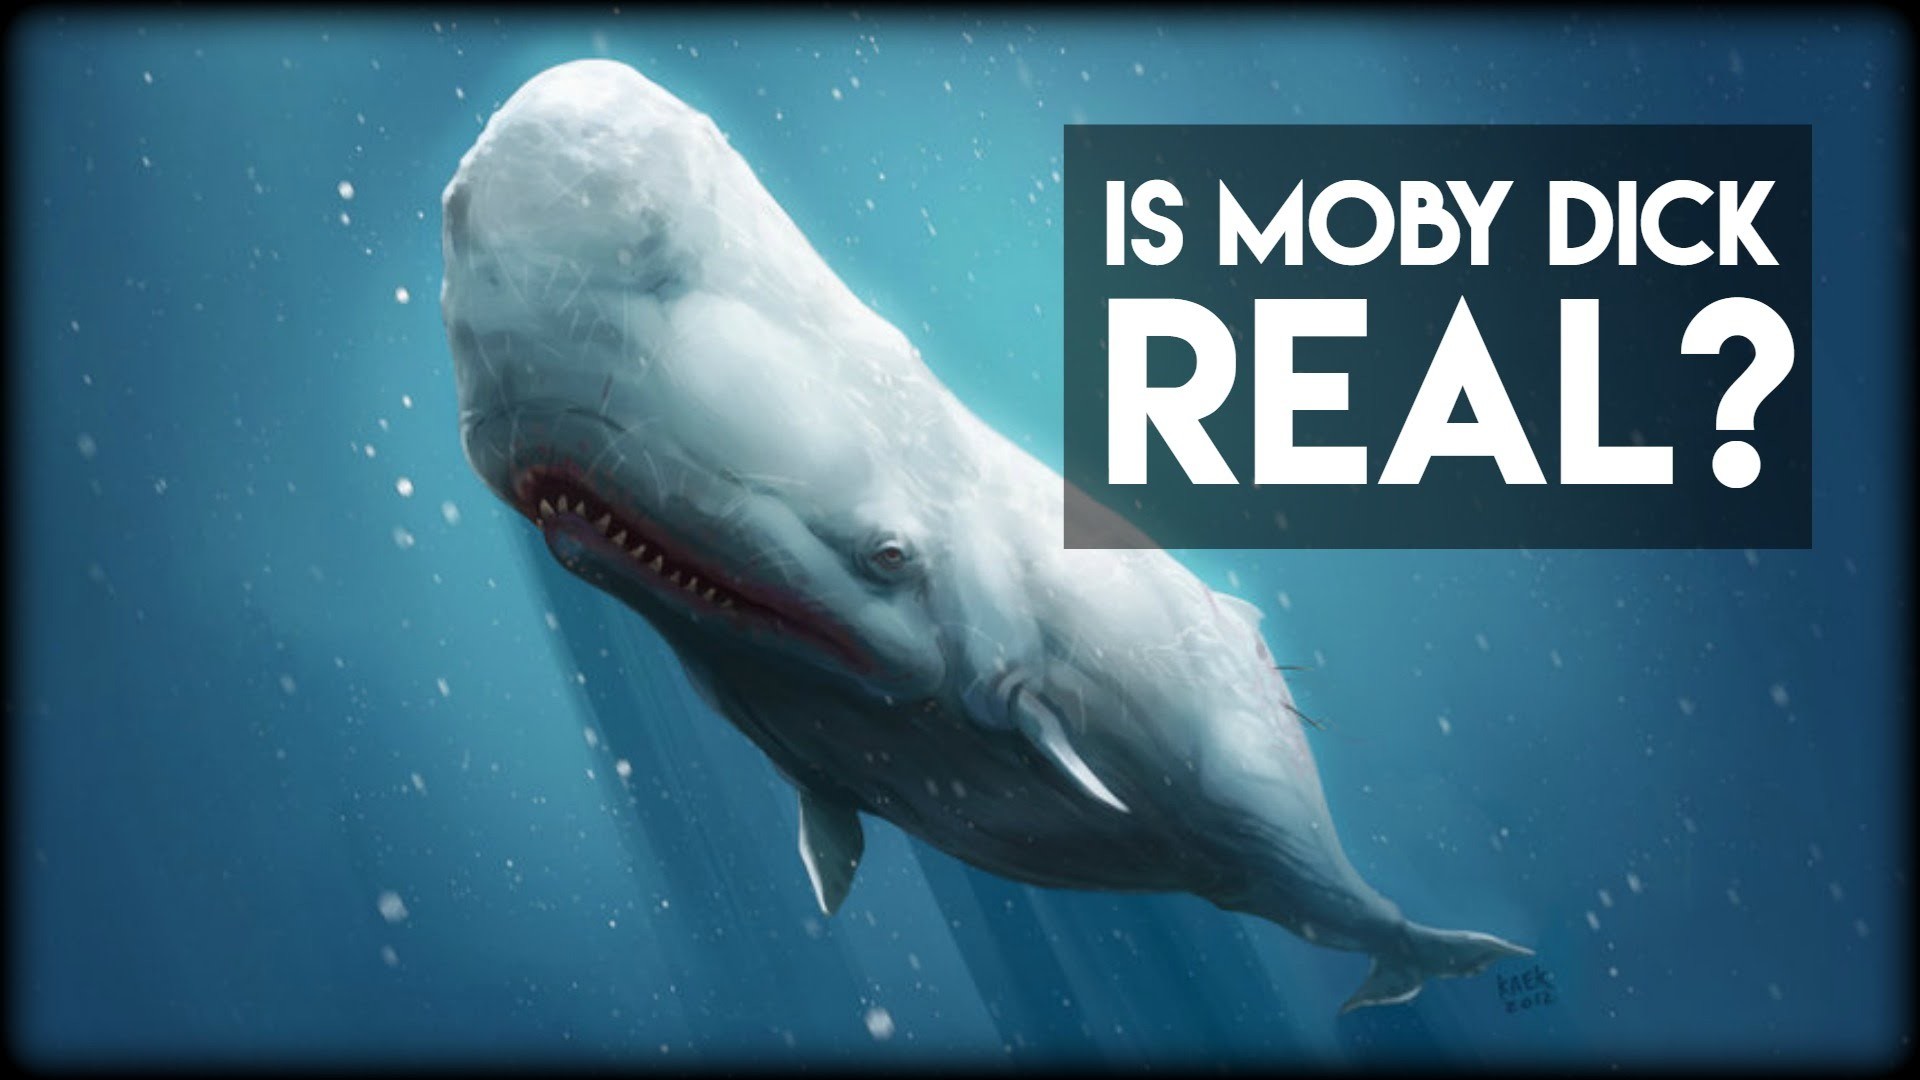 Moby dick of earth's primal generation